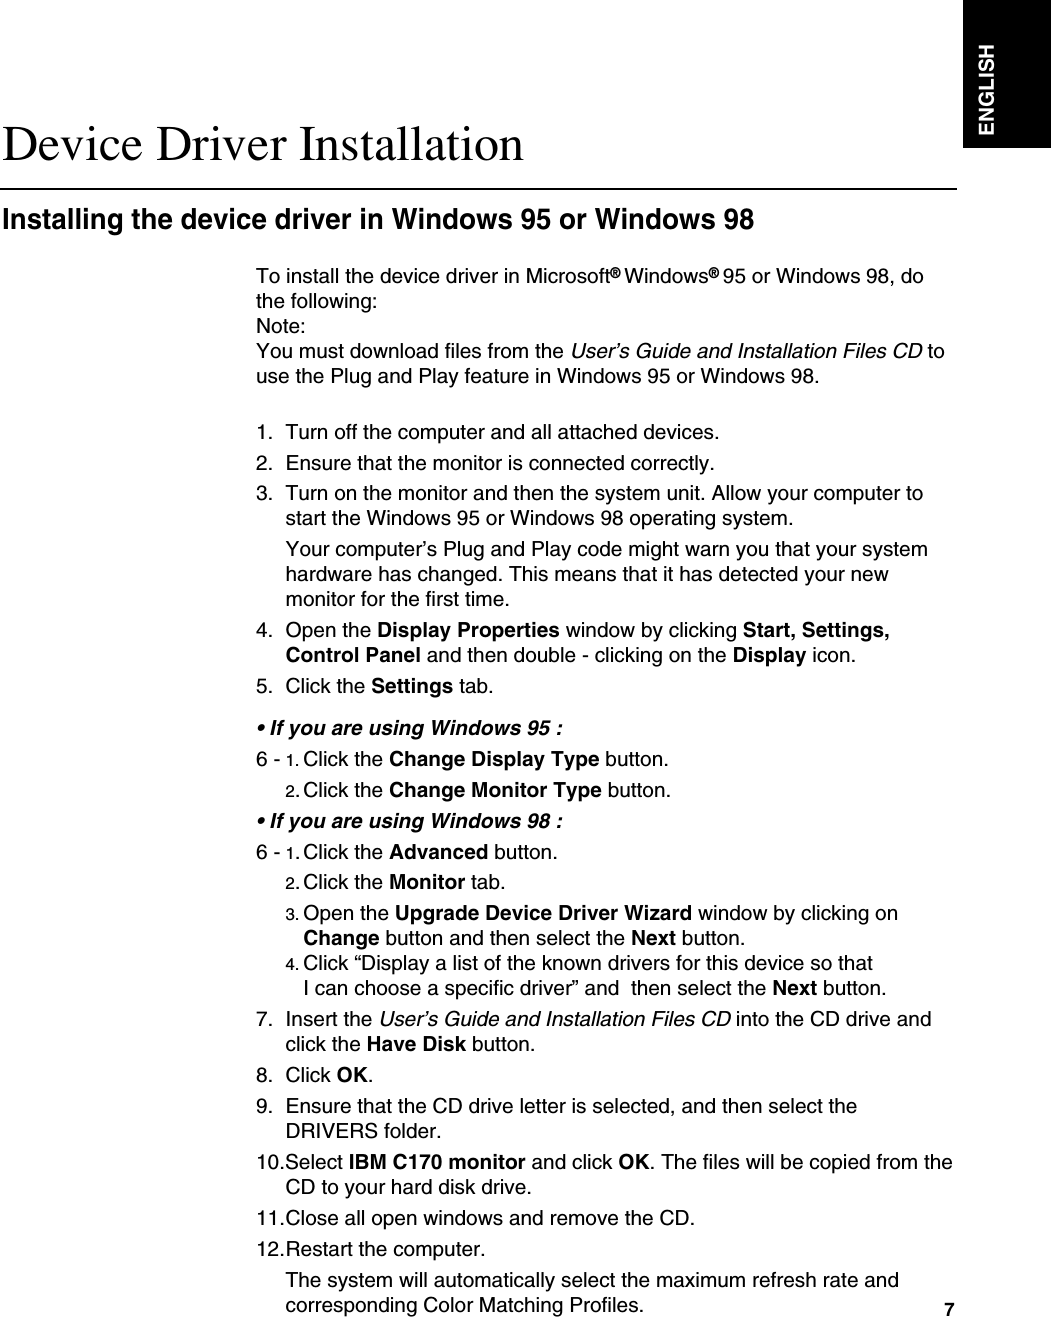 ENGLISH7To install the device driver in Microsoft®Windows®95 or Windows 98, dothe following: Note:You must download files from the User’s Guide and Installation Files CD touse the Plug and Play feature in Windows 95 or Windows 98.1. Turn off the computer and all attached devices.2. Ensure that the monitor is connected correctly.3. Turn on the monitor and then the system unit. Allow your computer tostart the Windows 95 or Windows 98 operating system.Your computer’s Plug and Play code might warn you that your systemhardware has changed. This means that it has detected your newmonitor for the first time.4. Open the Display Properties window by clicking Start, Settings,Control Panel and then double - clicking on the Display icon.5. Click the Settings tab.• If you are using Windows 95 : 6 - 1. Click the Change Display Type button.2.Click the Change Monitor Type button.• If you are using Windows 98 :6 - 1.Click the Advanced button.2.Click the Monitor tab.    3. Open the Upgrade Device Driver Wizard window by clicking on Change button and then select the Next button. 4. Click “Display a list of the known drivers for this device so that I can choose a specific driver” and  then select the Next button. 7. Insert the User’s Guide and Installation Files CD into the CD drive andclick the Have Disk button.8. Click OK.9. Ensure that the CD drive letter is selected, and then select theDRIVERS folder.10.Select IBM C170 monitor and click OK. The files will be copied from theCD to your hard disk drive.11.Close all open windows and remove the CD.12.Restart the computer.The system will automatically select the maximum refresh rate andcorresponding Color Matching Profiles.   Device Driver InstallationInstalling the device driver in Windows 95 or Windows 98